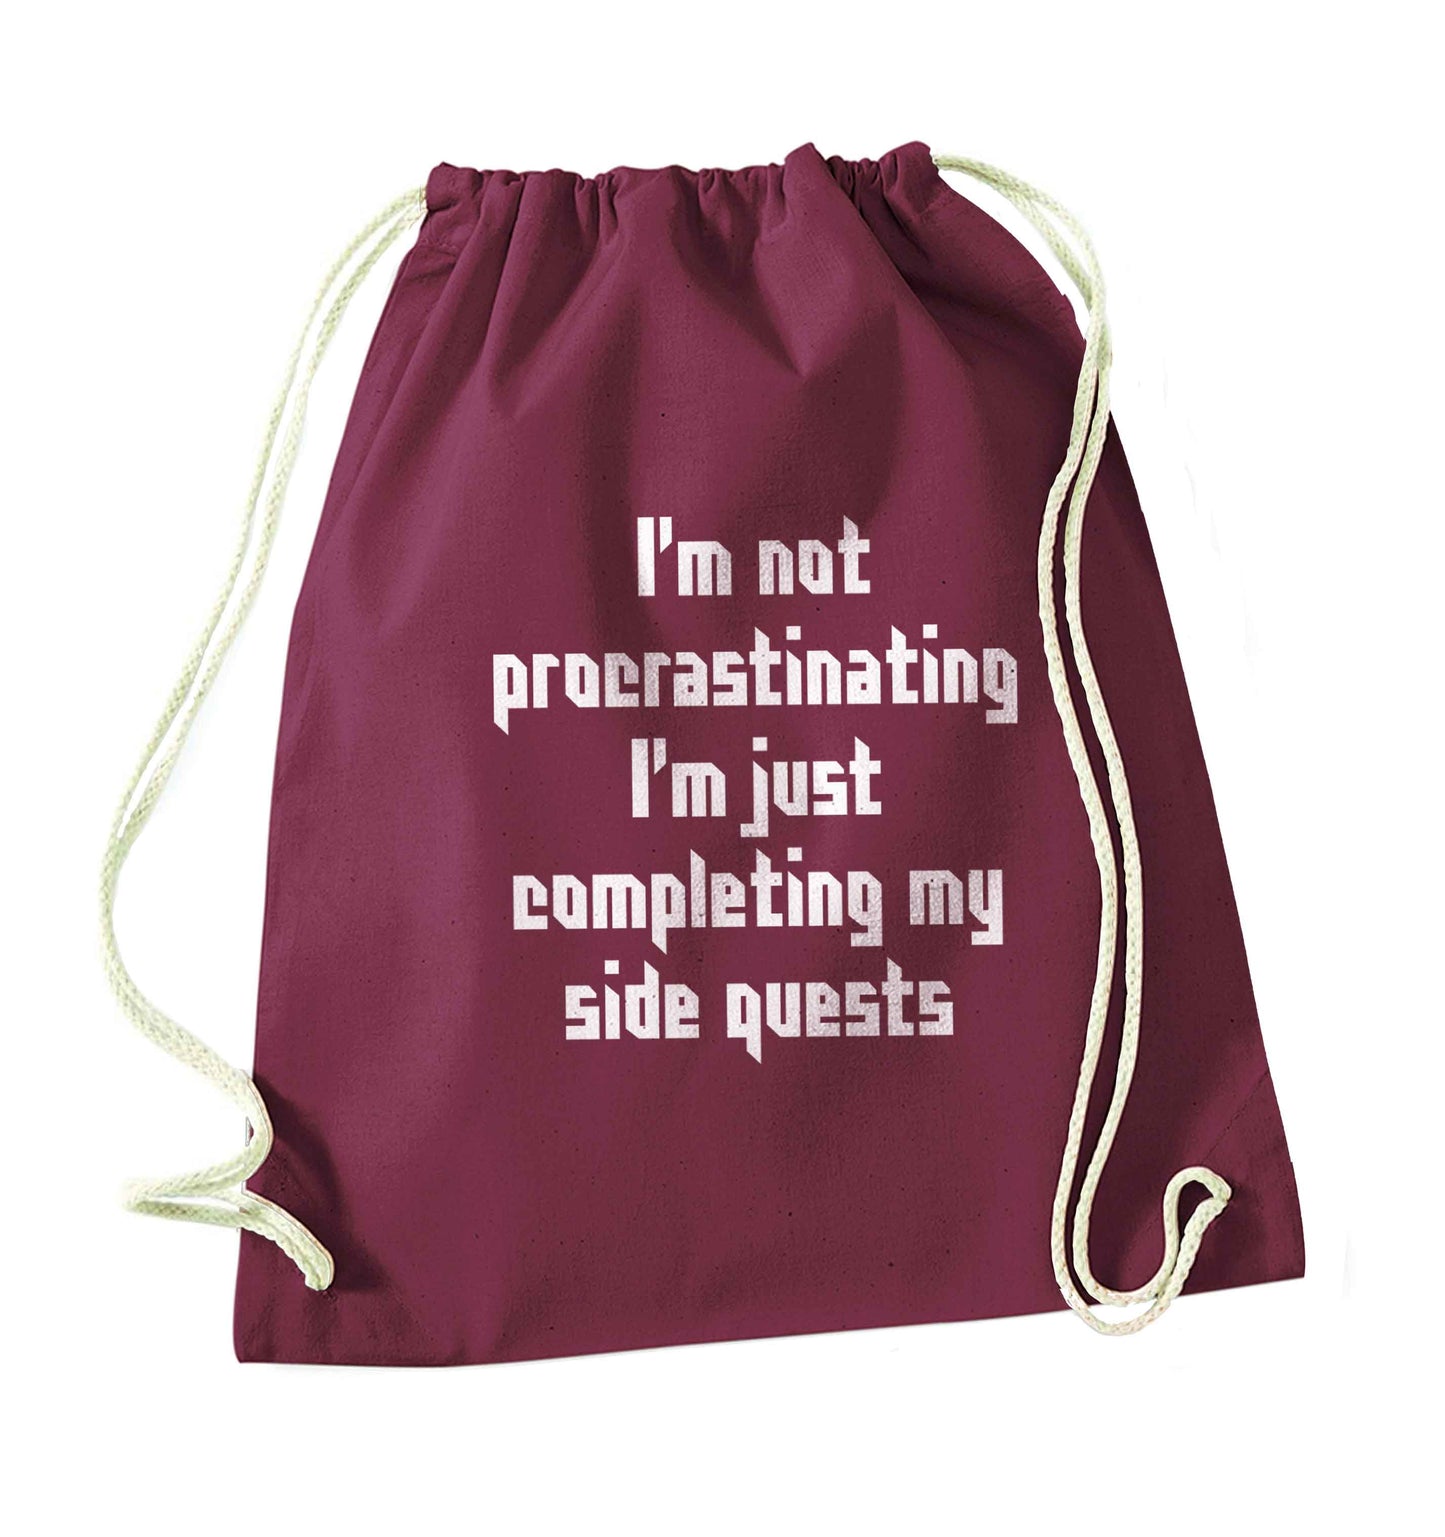 I'm not procrastinating I'm just completing my side quests maroon drawstring bag